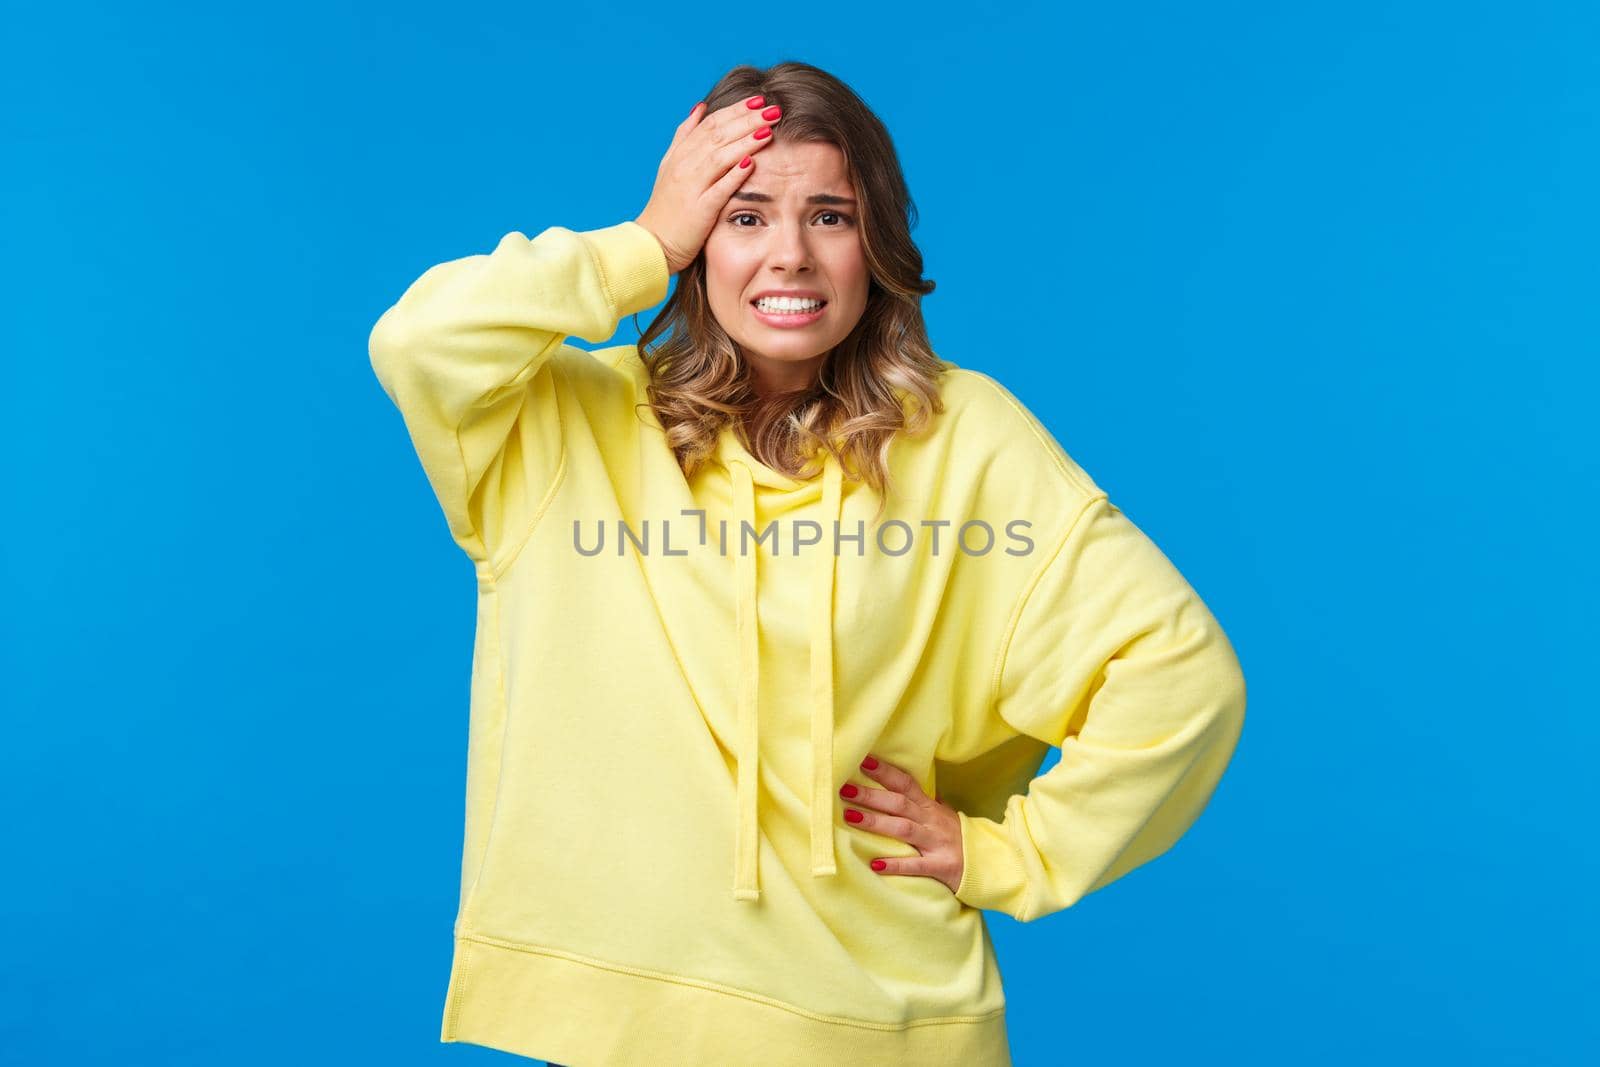 Embarrassed and worried girl bumped into car, feel anxious and concerned, touch head troubled, grimacing with awkward grin, face problematic situation, stand blue background by Benzoix